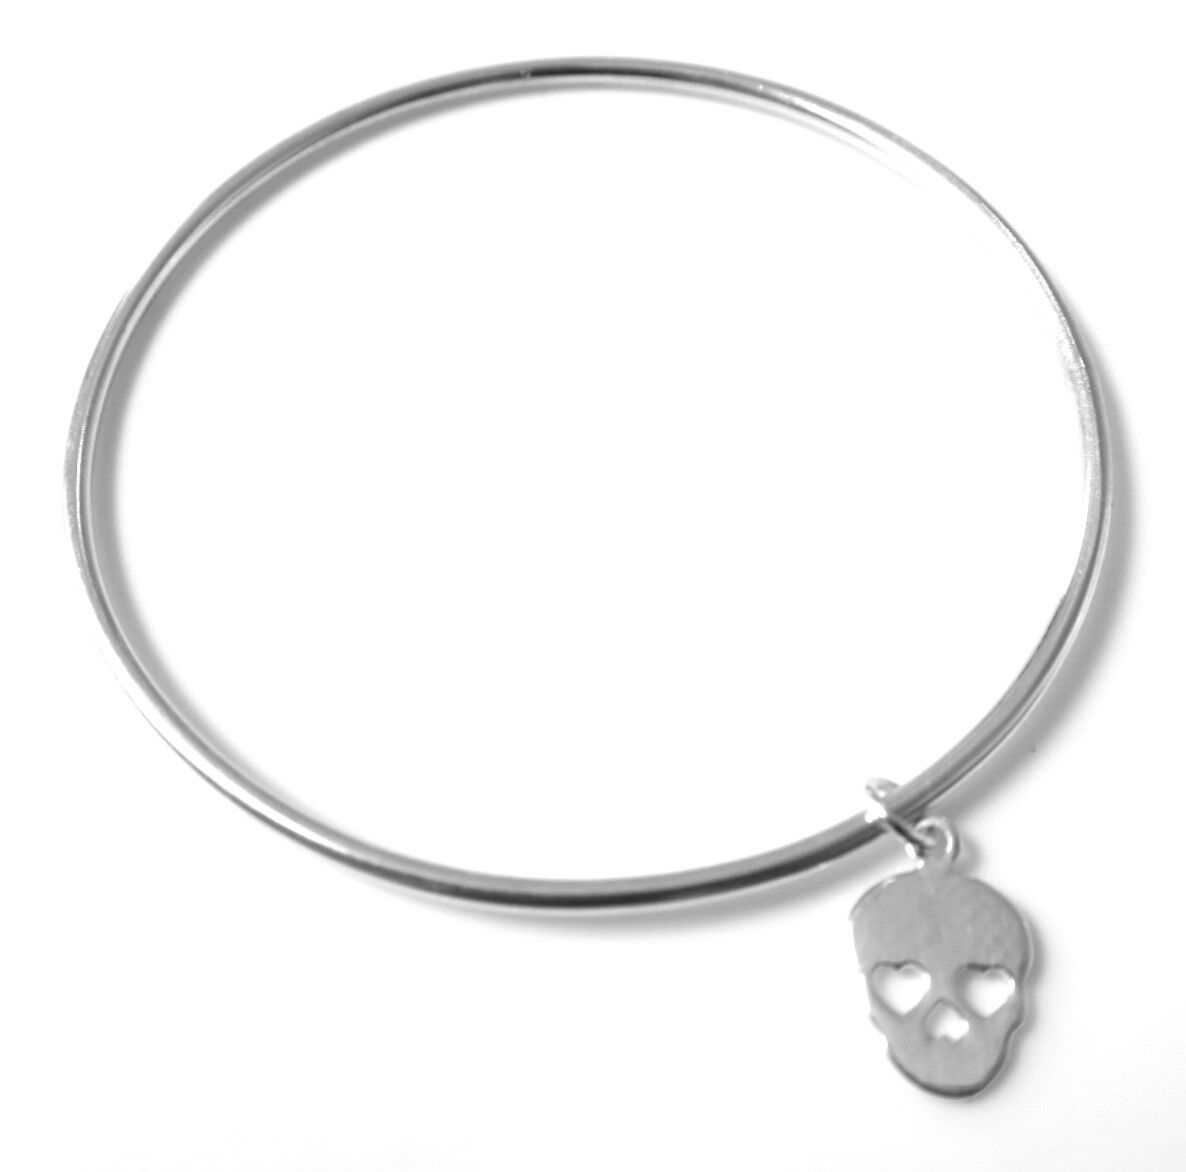 Sugar Skull Day of the Dead Charm on 2mm Sterling Silver Round Bangle Bracelet